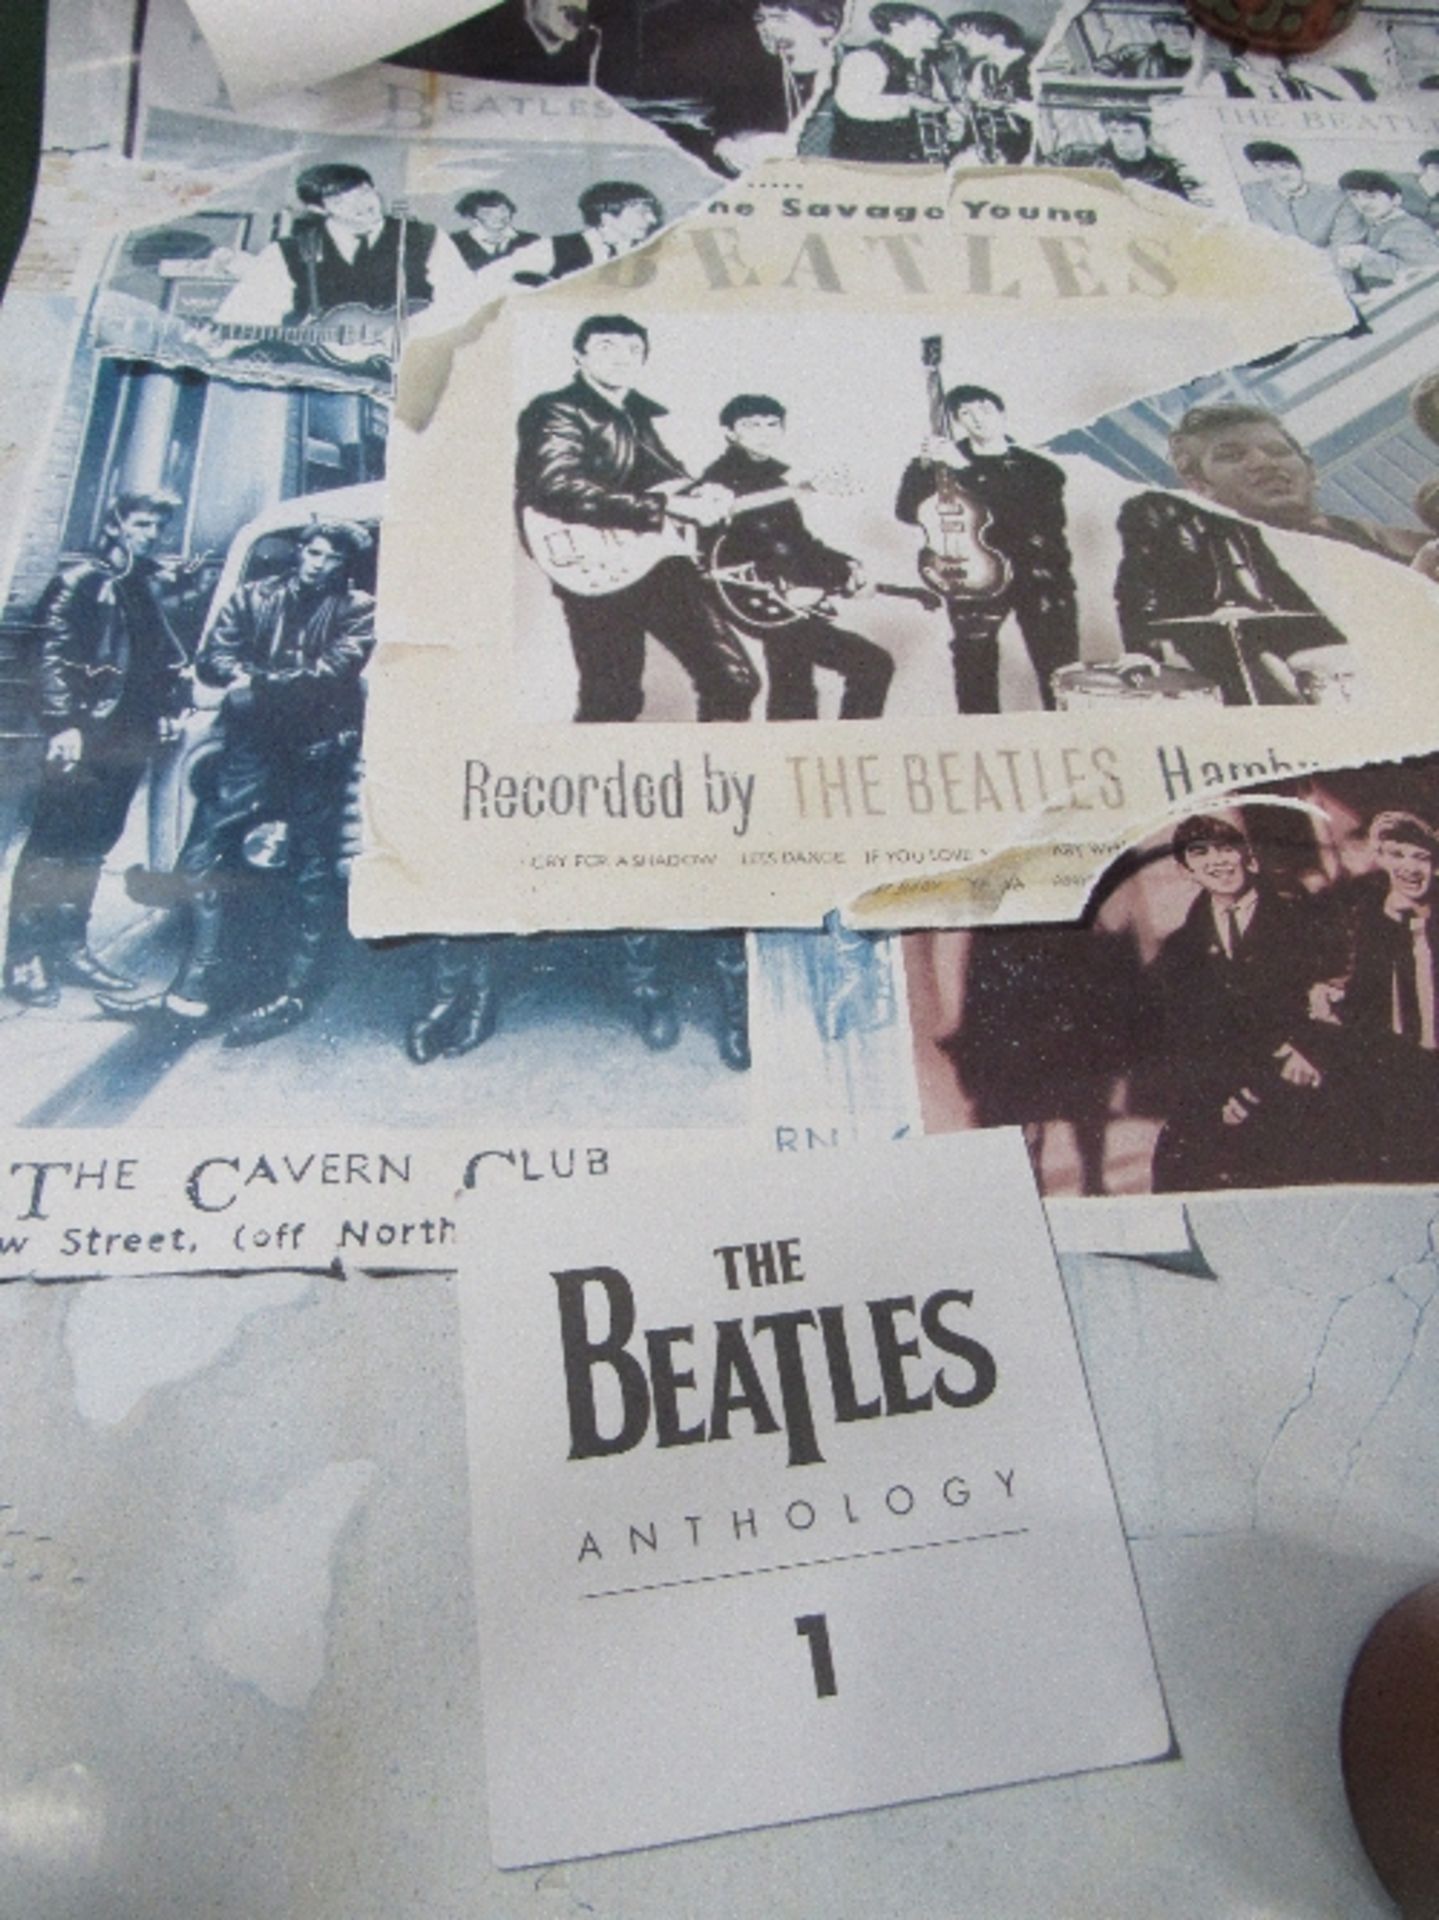 4 Beatles Anthology posters including un-issued Anthology 3 poster. Estimate £20-30.